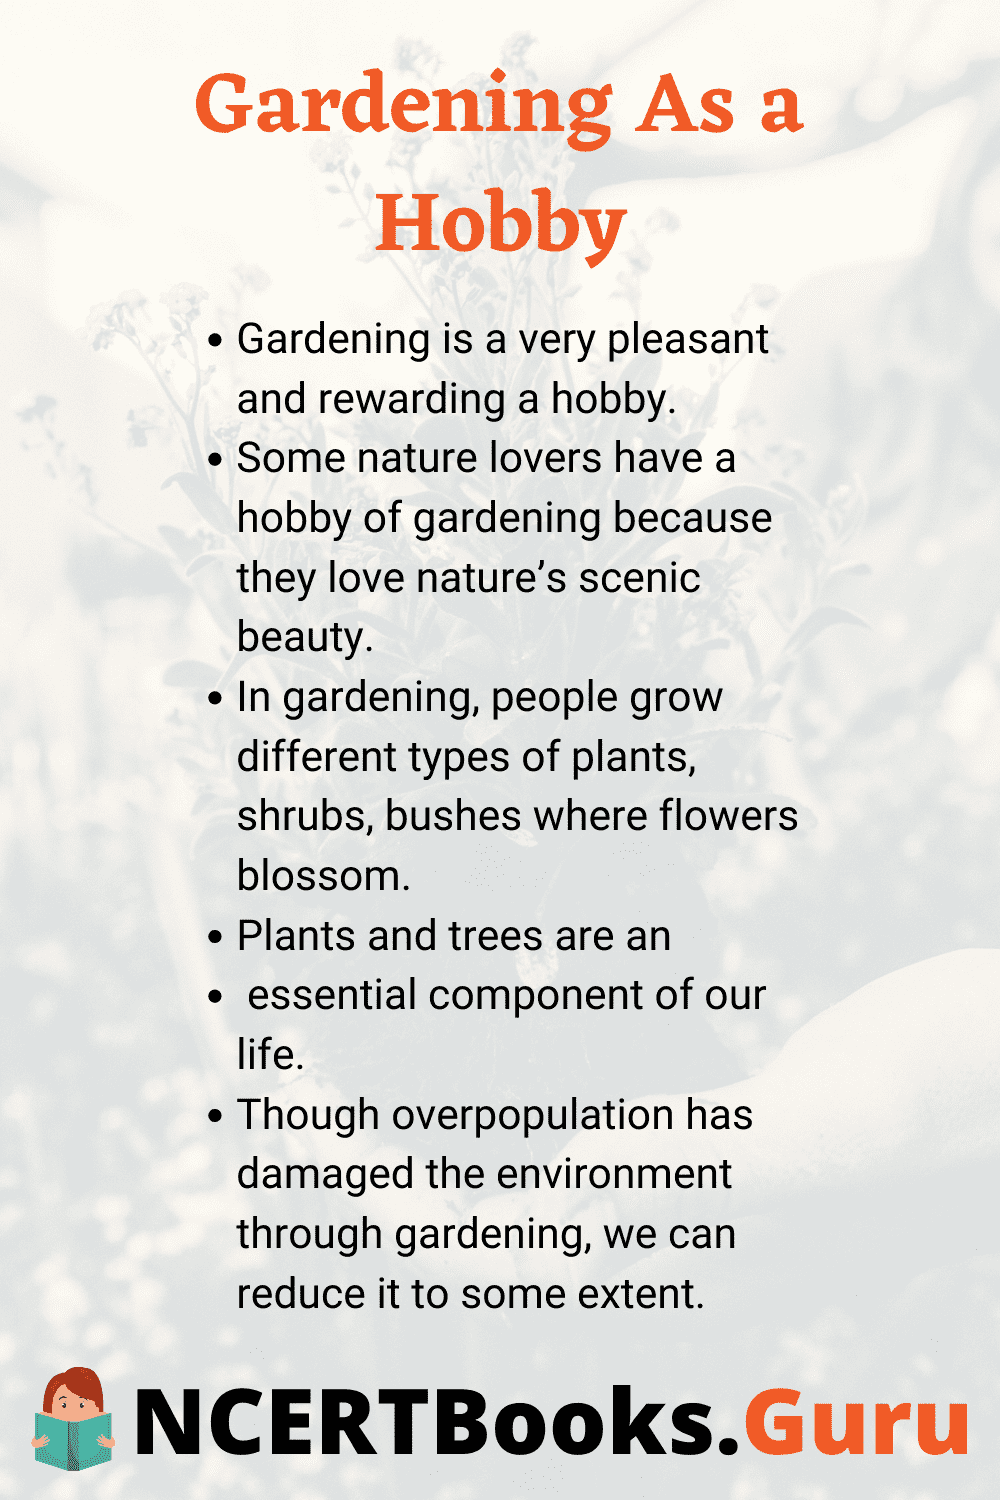 essay on my hobby gardening for class 6